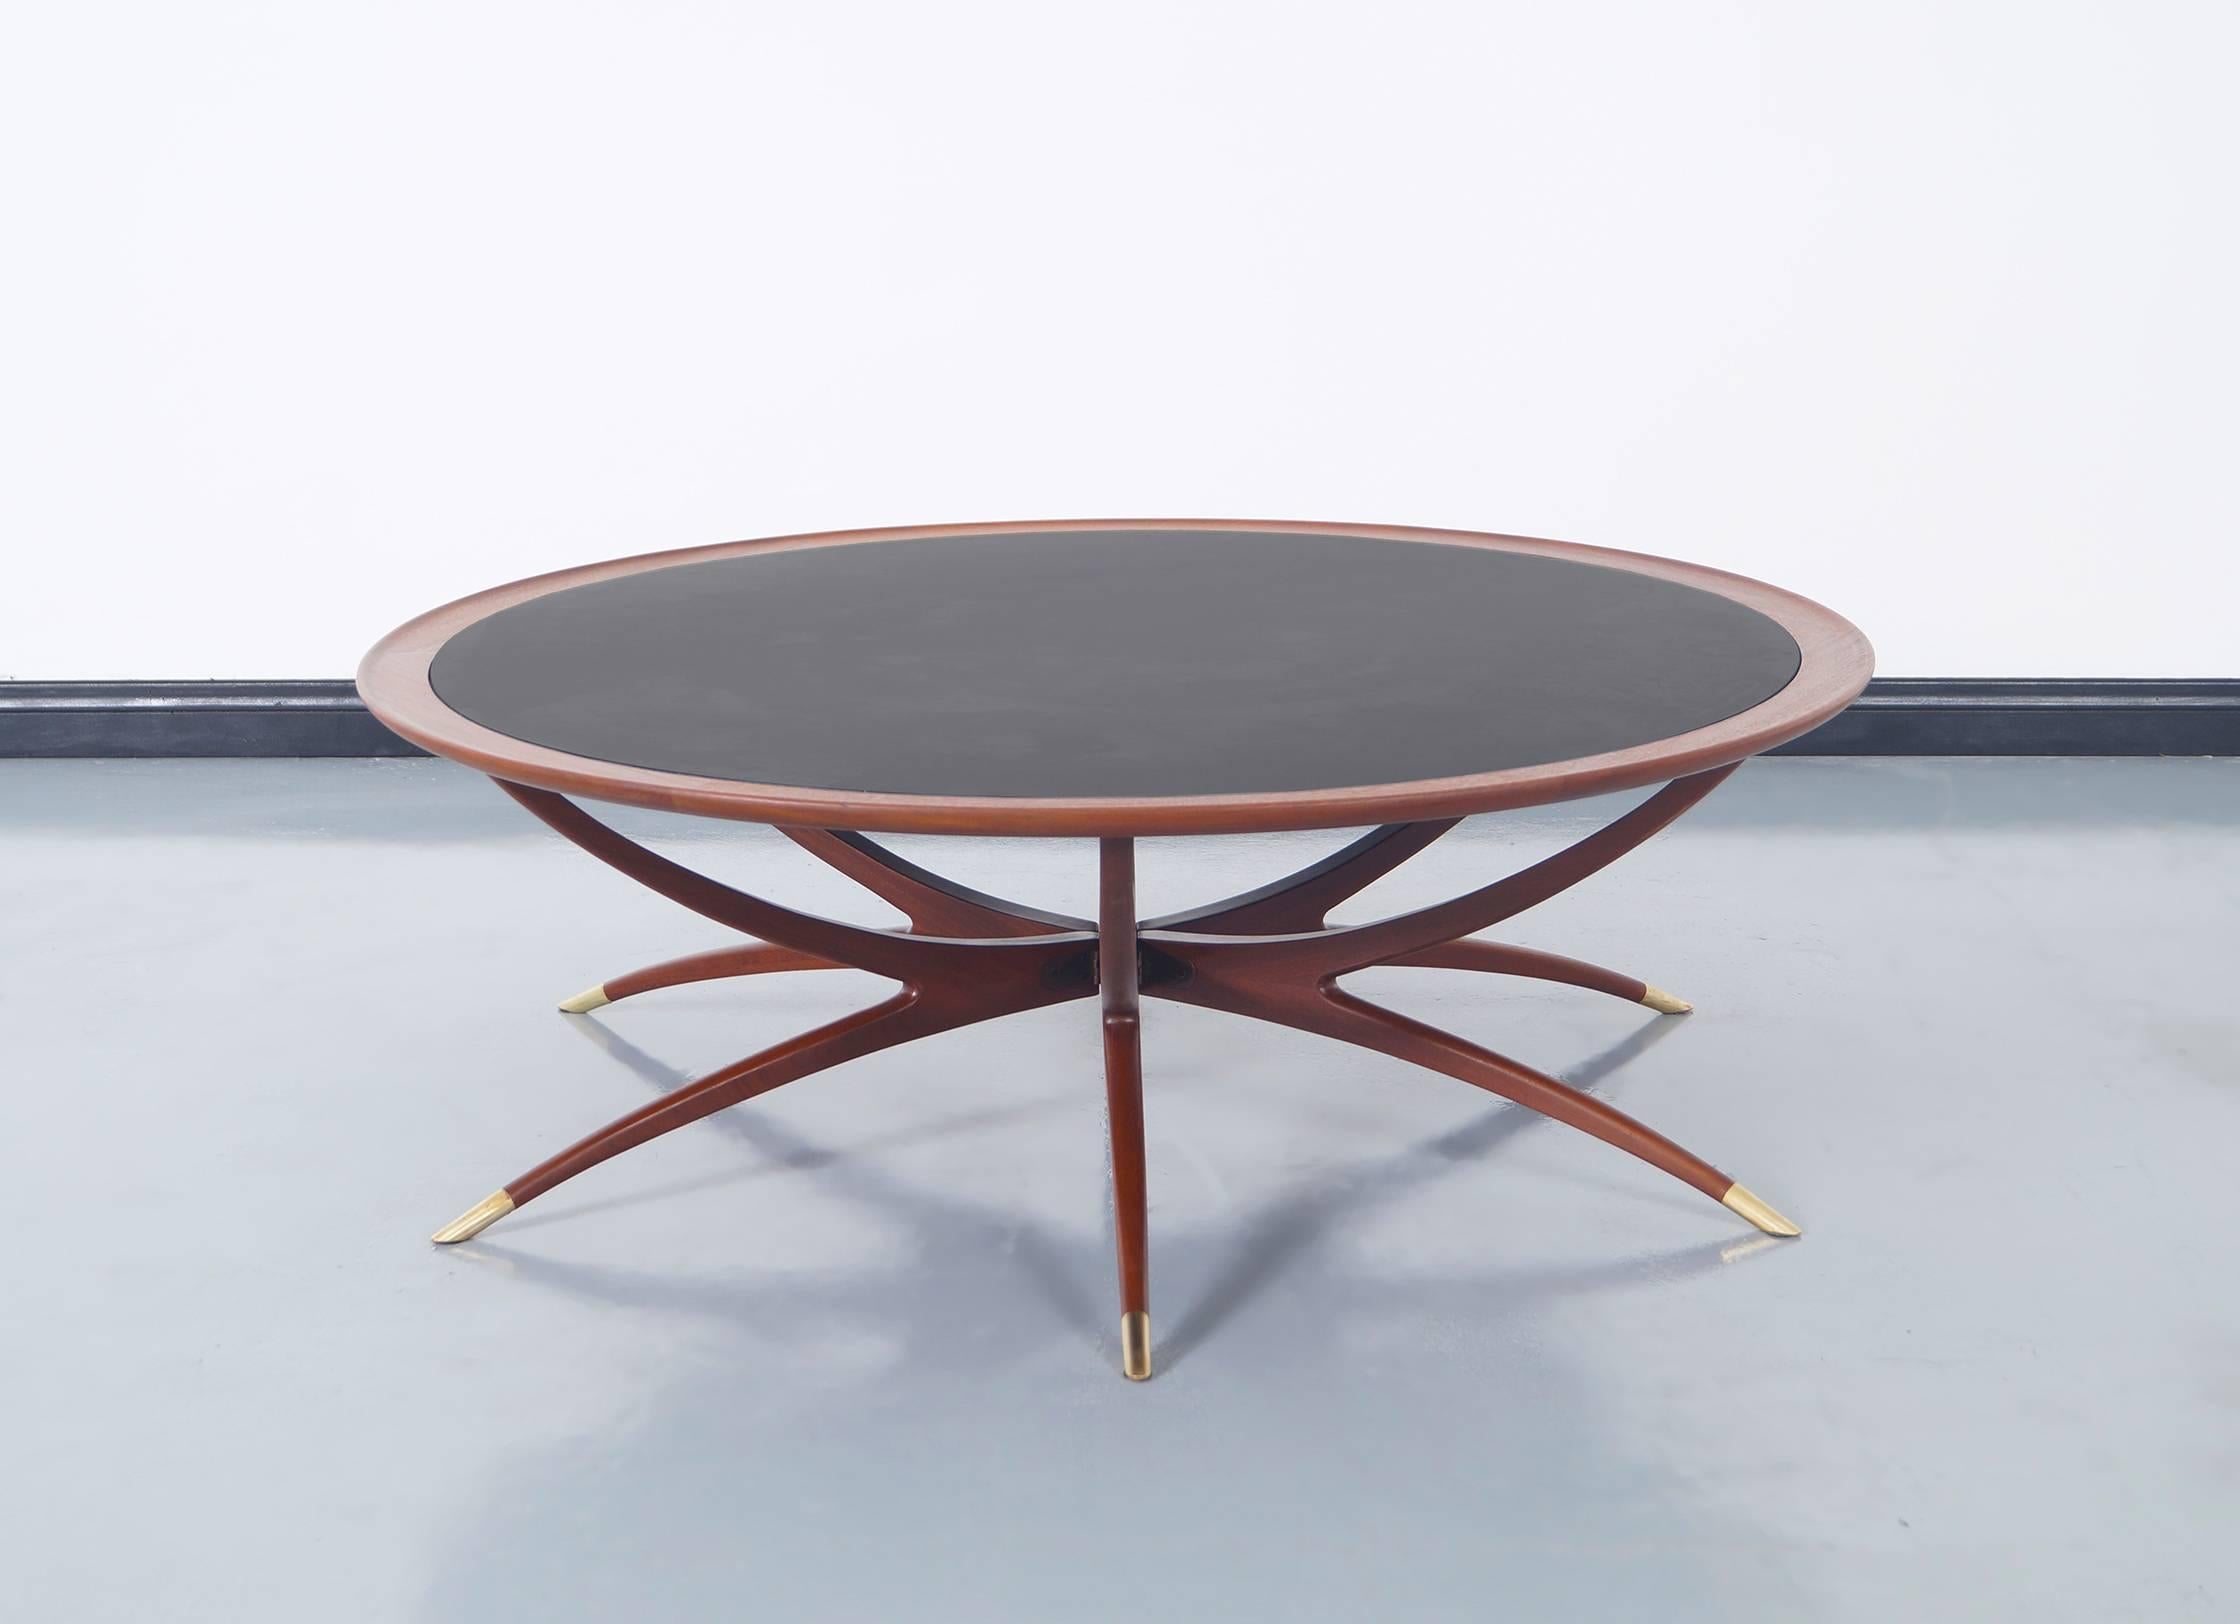 Stunning vintage spider leg coffee table attributed to Carlo Di Carli, circa 1960s. This coffee table has an avant-garde design, highlights the solid walnut frame that supports a circular glass top. It has 6 sculptural legs, all covered at the